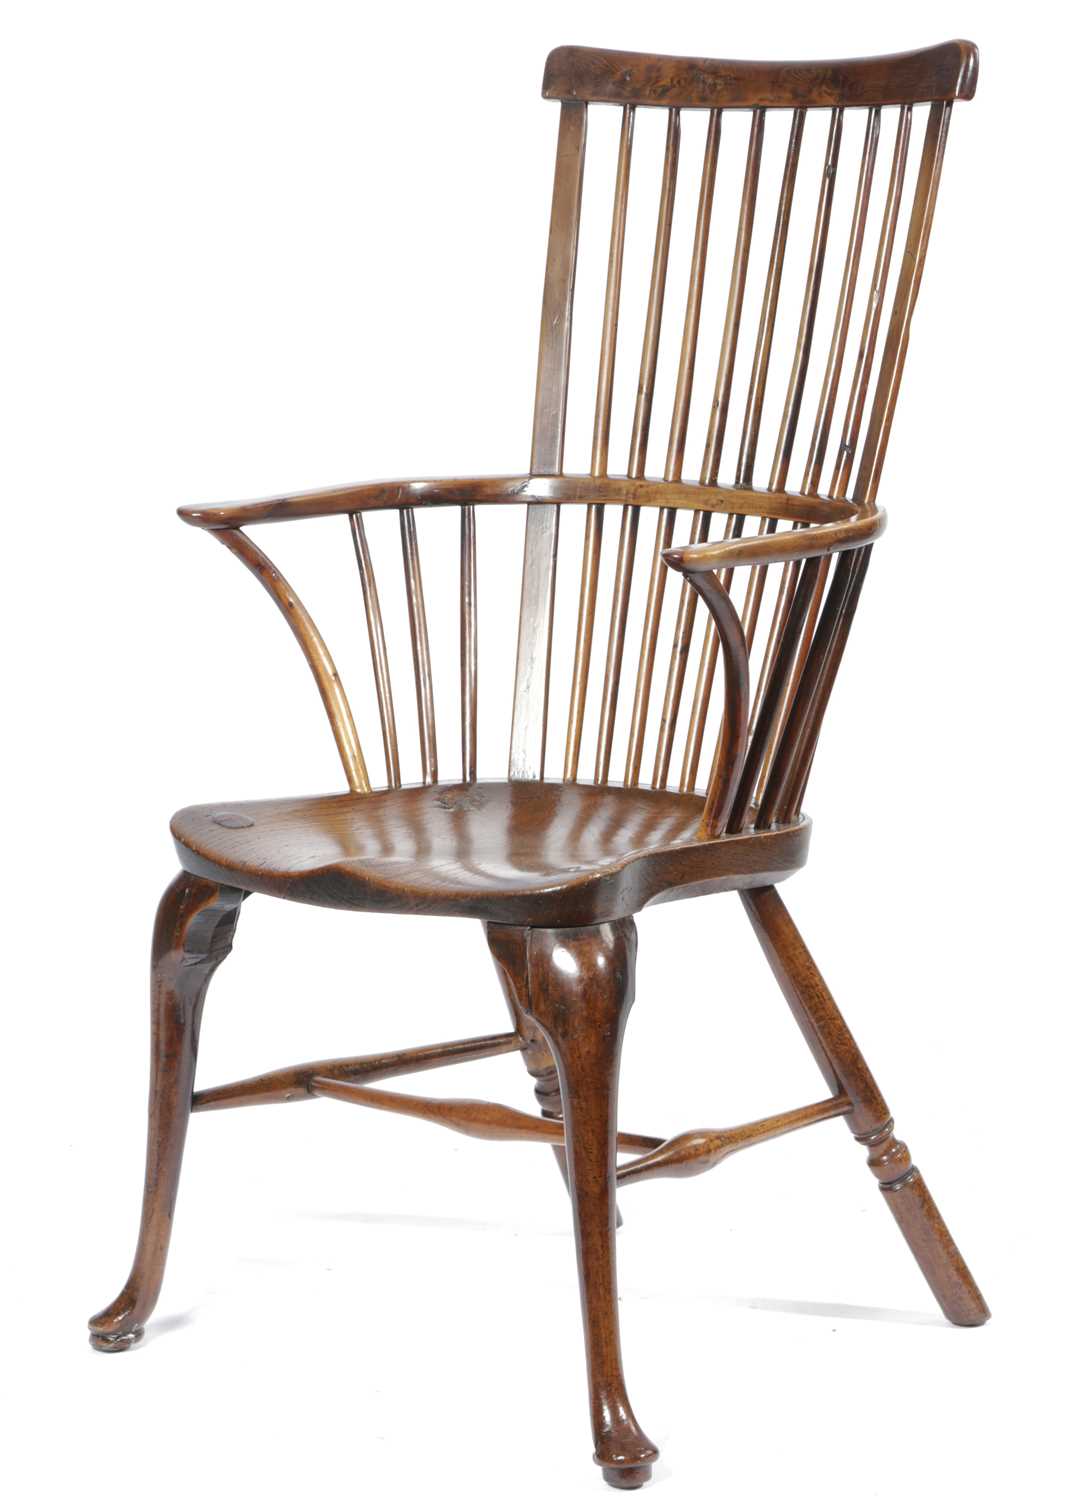 A GEORGE III YEW AND ELM WINDSOR ARMCHAIR LATE 18TH / EARLY 19TH CENTURY the comb top rail above a